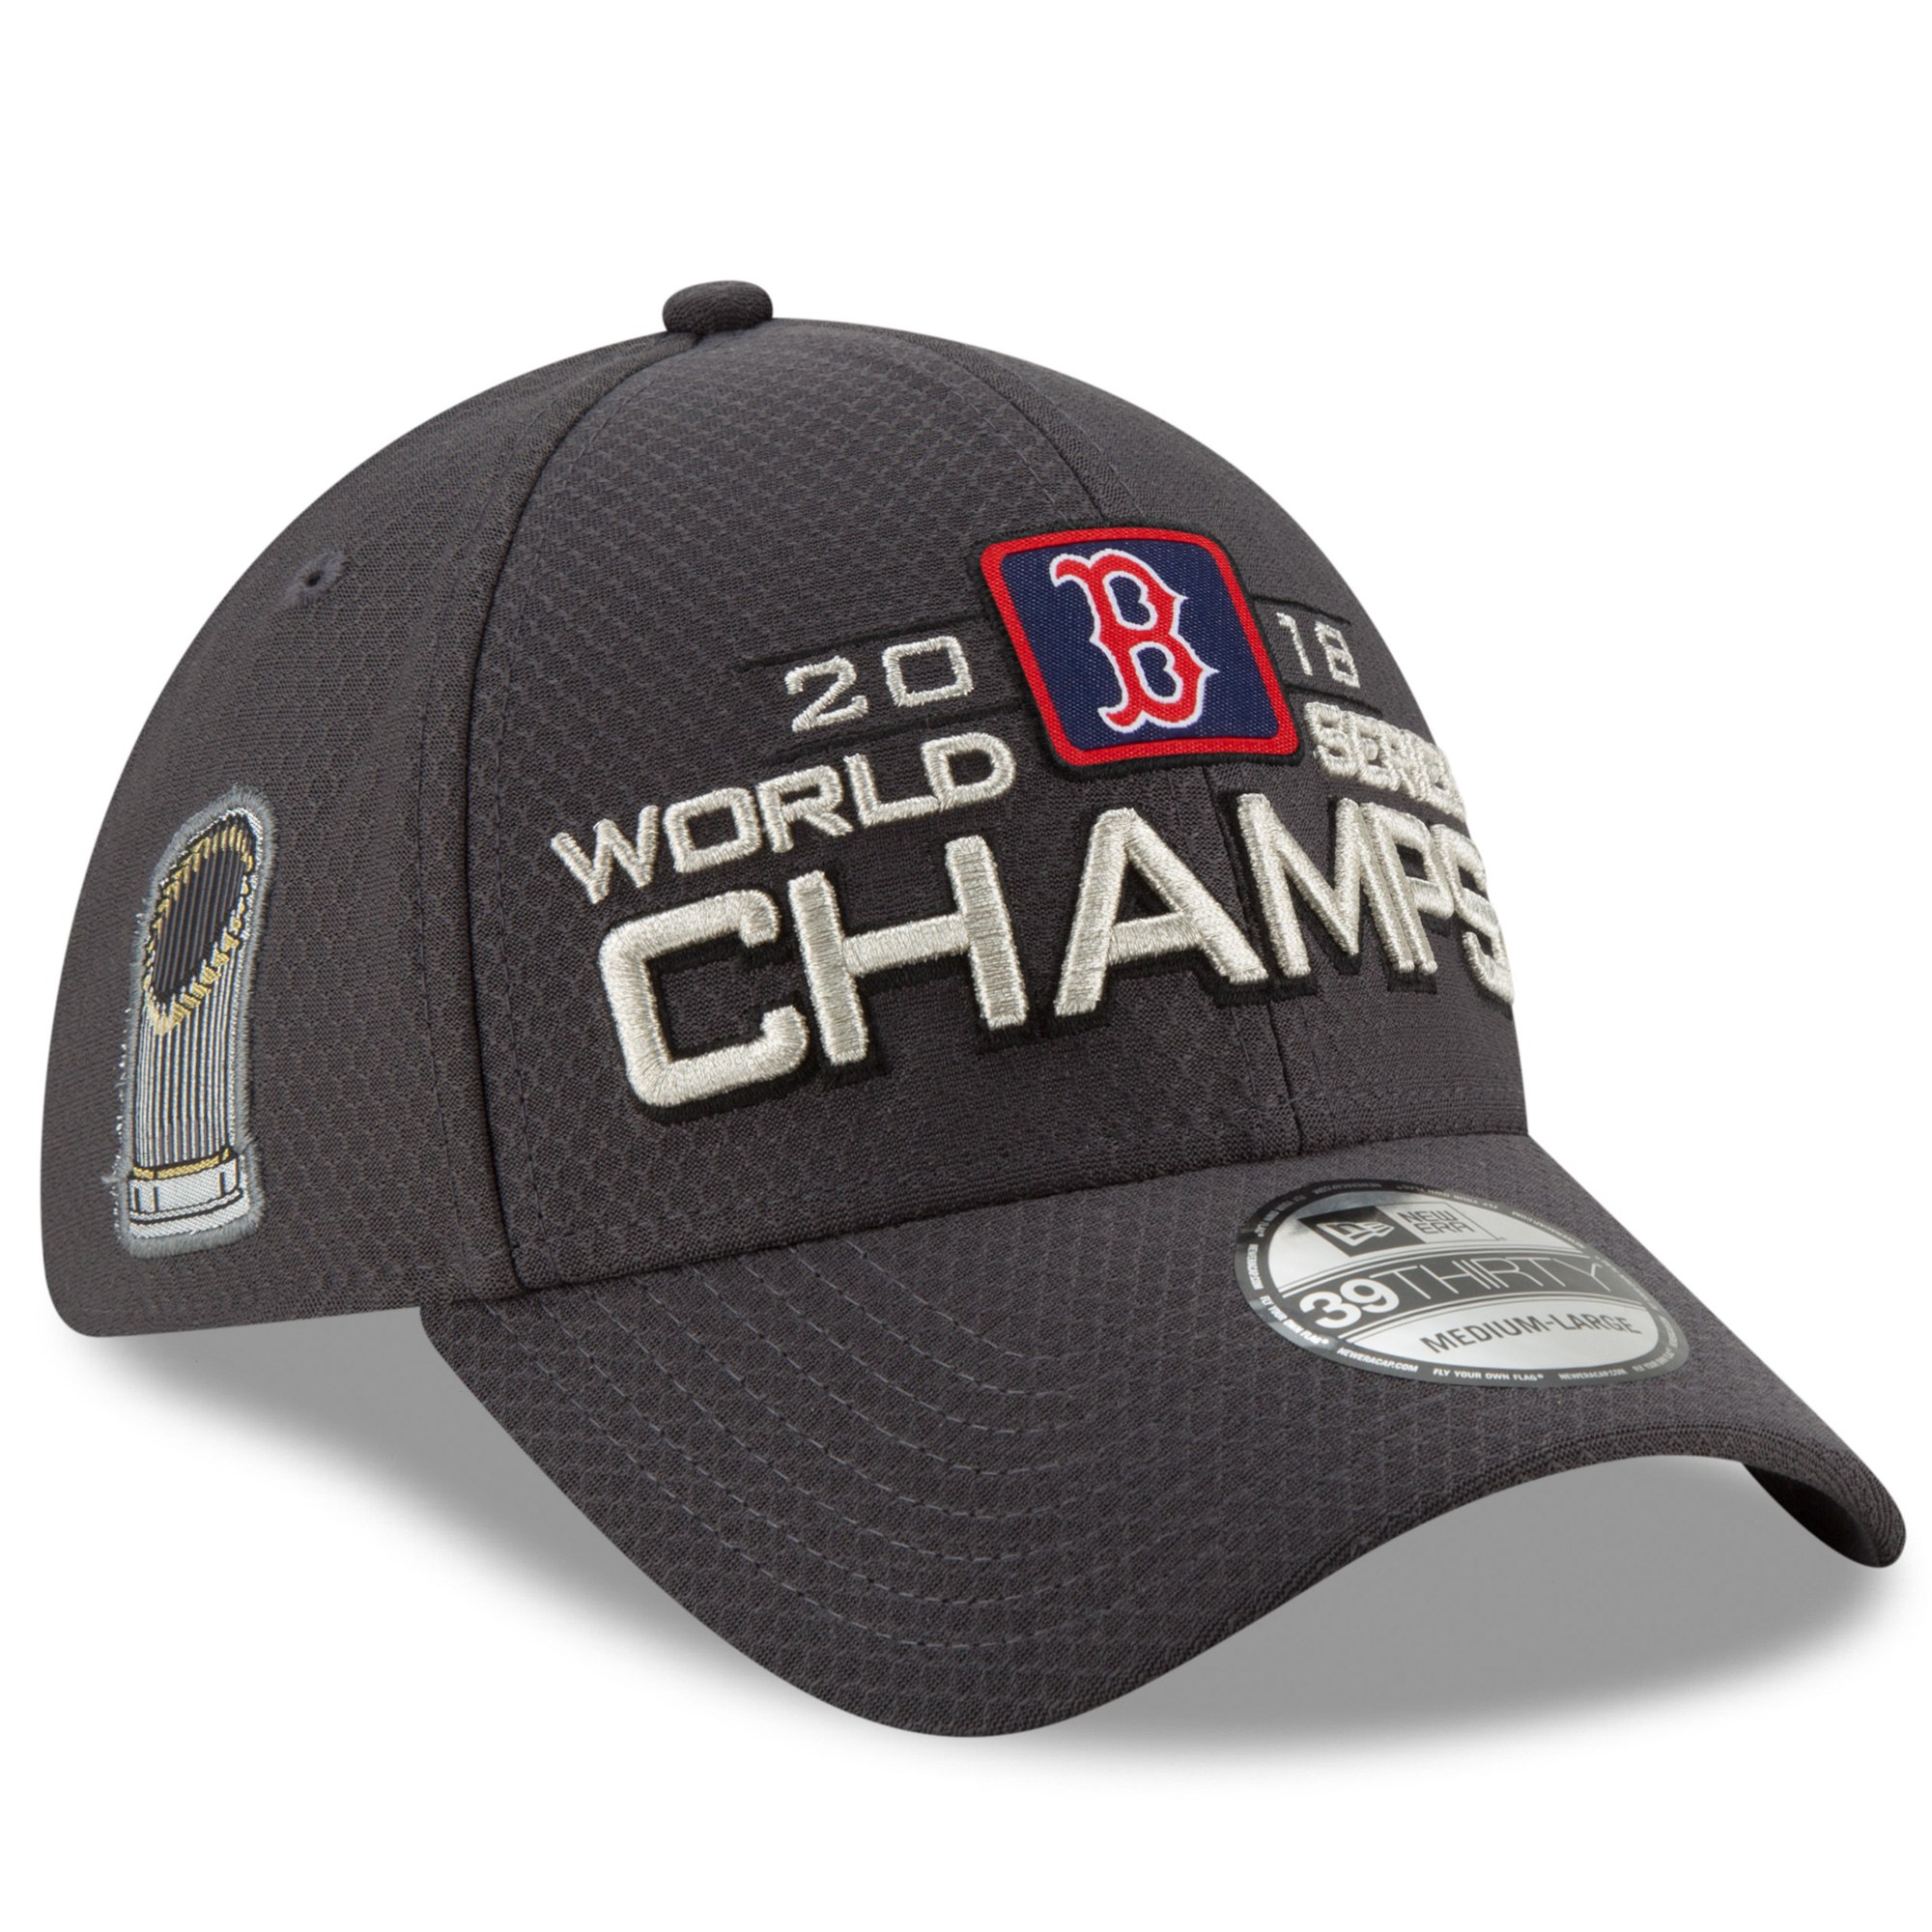 red sox world series champs gear